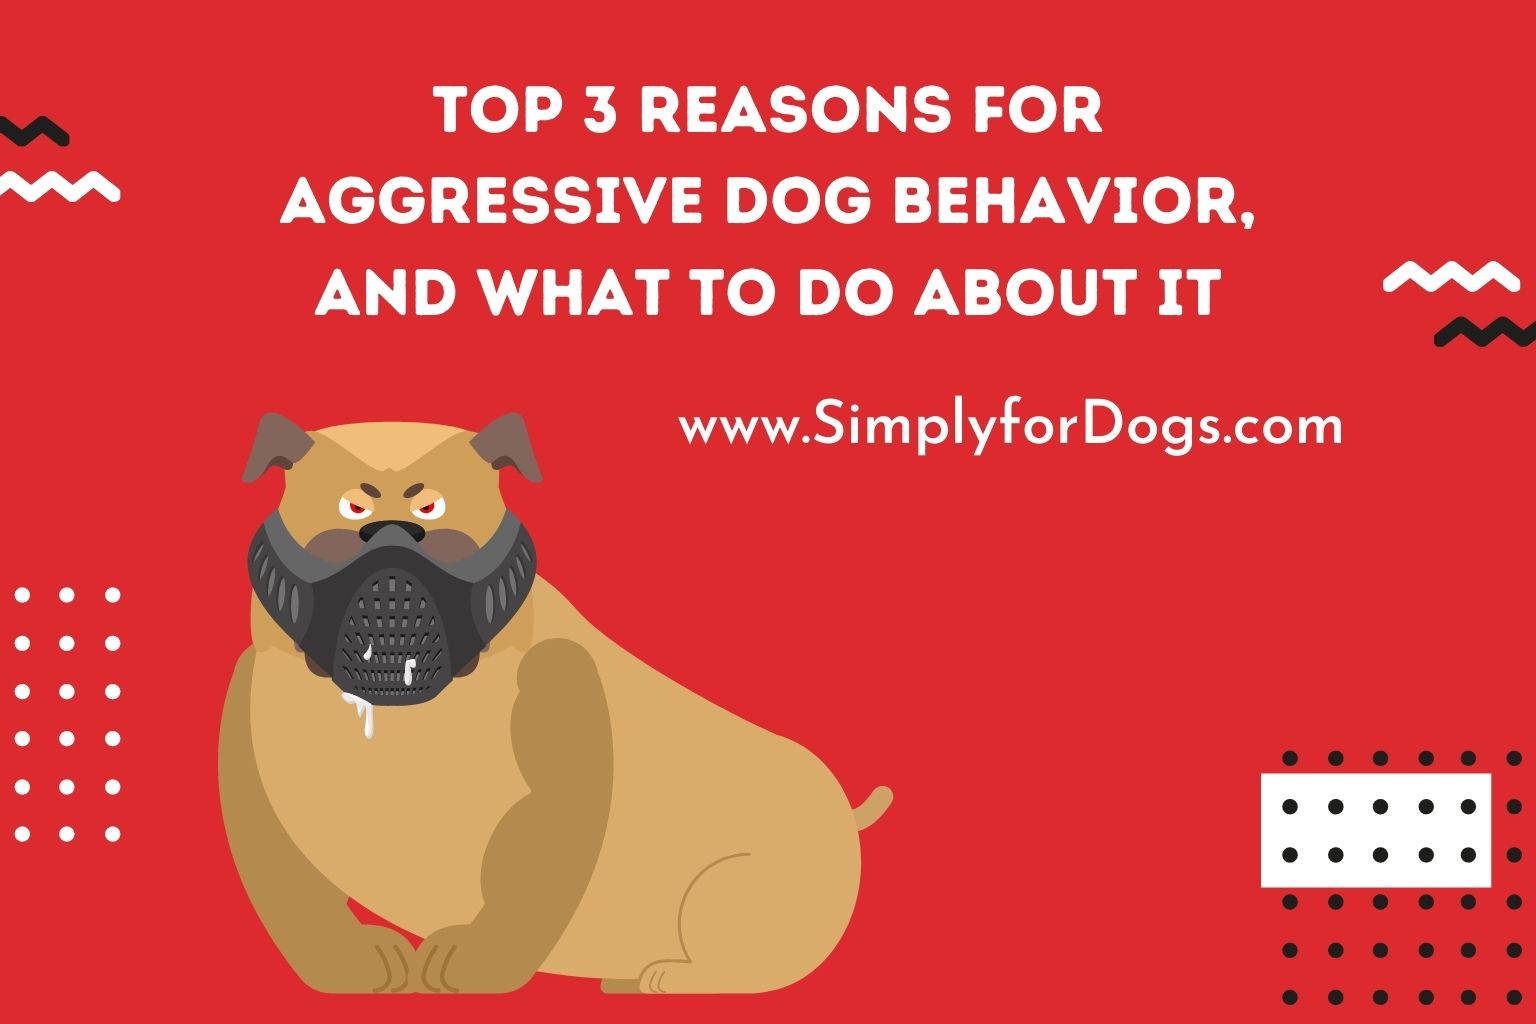 Top 3 Reasons for Aggressive Dog Behavior, and What to Do About It